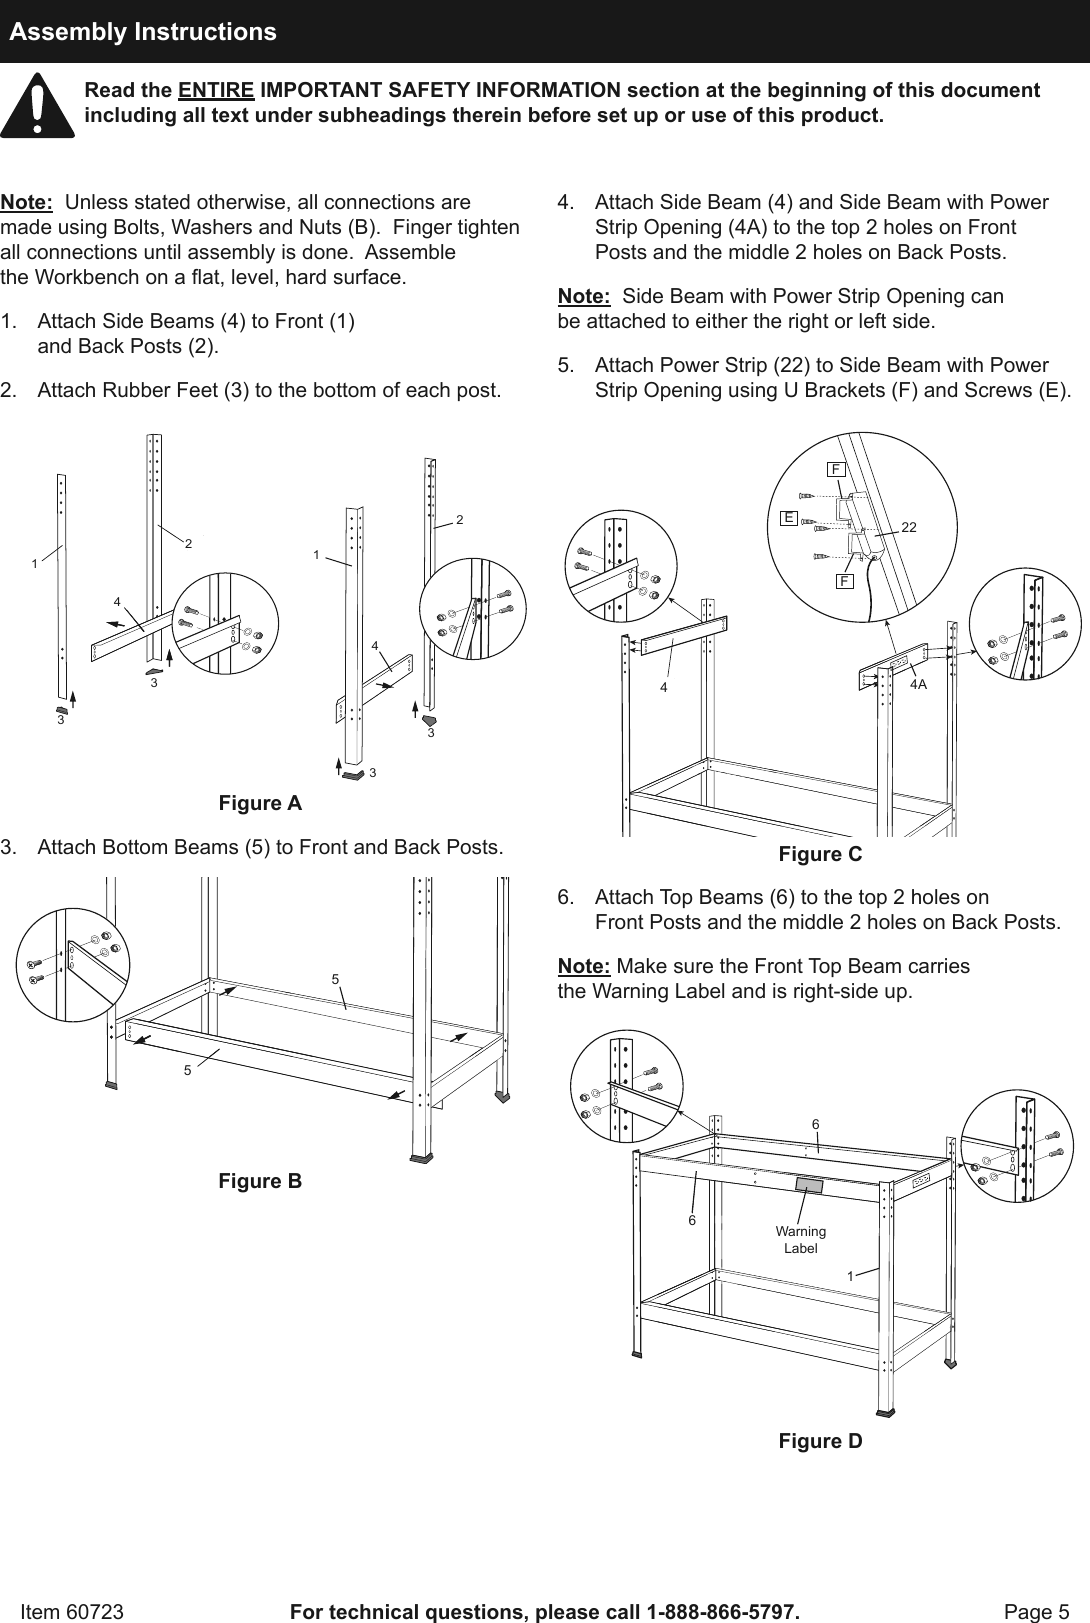 Page 5 of 12 - Harbor-Freight Harbor-Freight-Multipurpose-Workbench-With-Light-Product-Manual-  Harbor-freight-multipurpose-workbench-with-light-product-manual